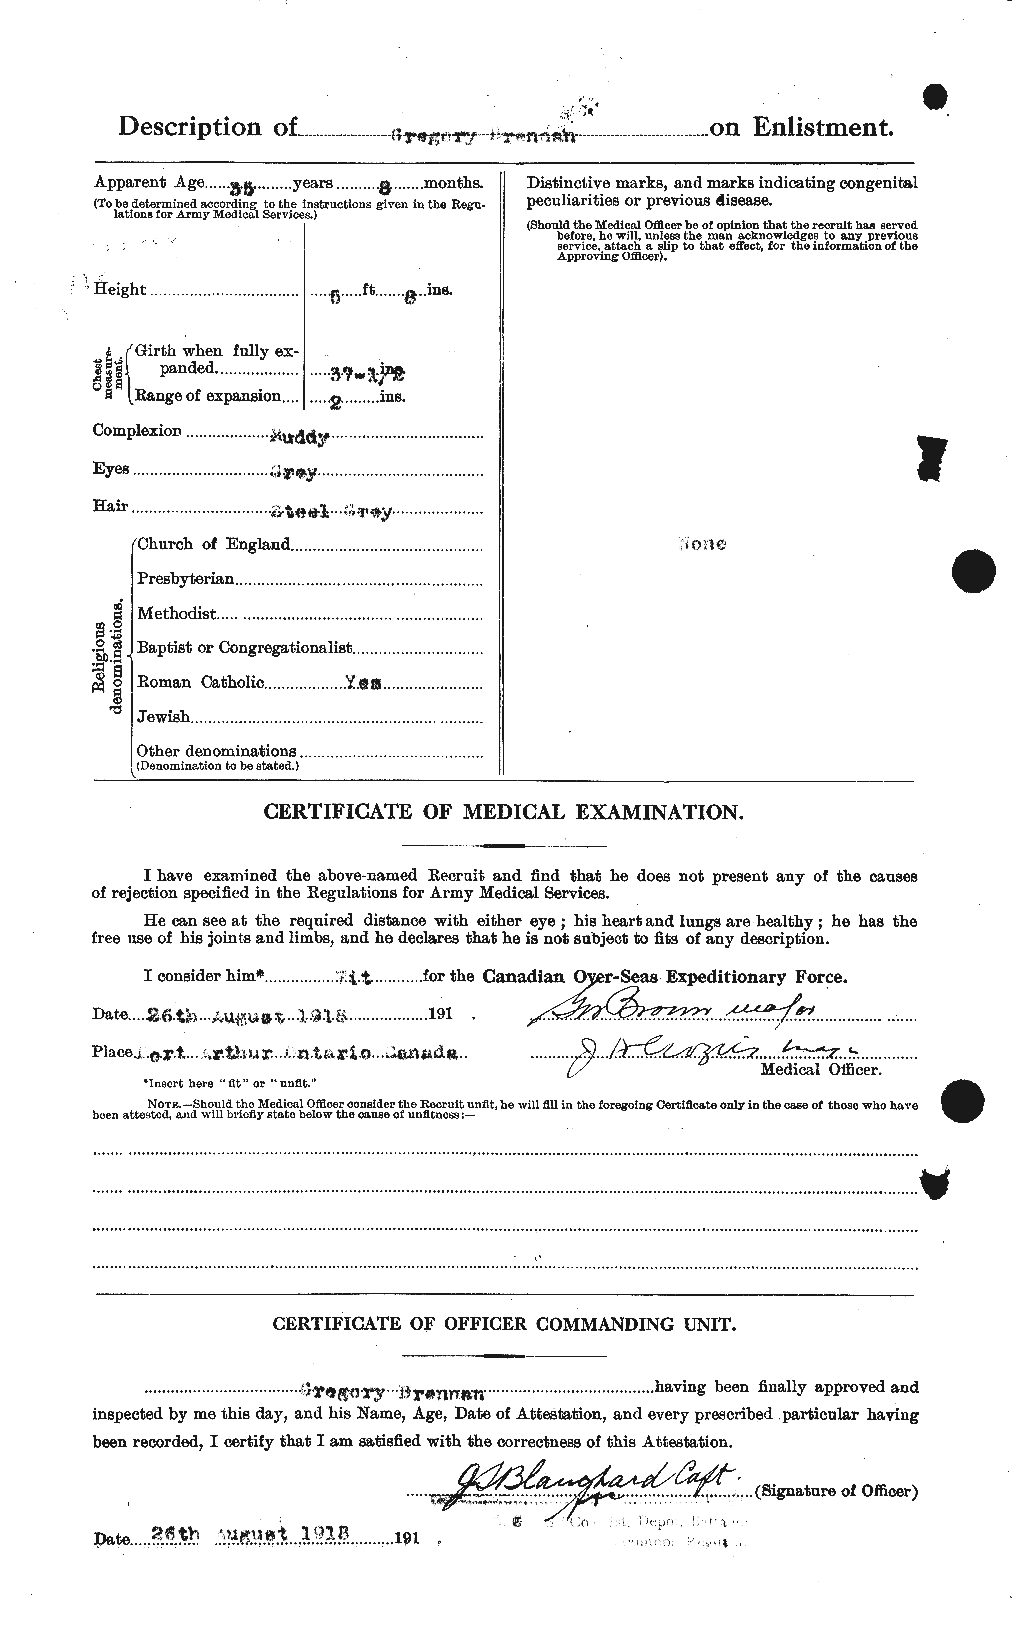 Personnel Records of the First World War - CEF 259310b